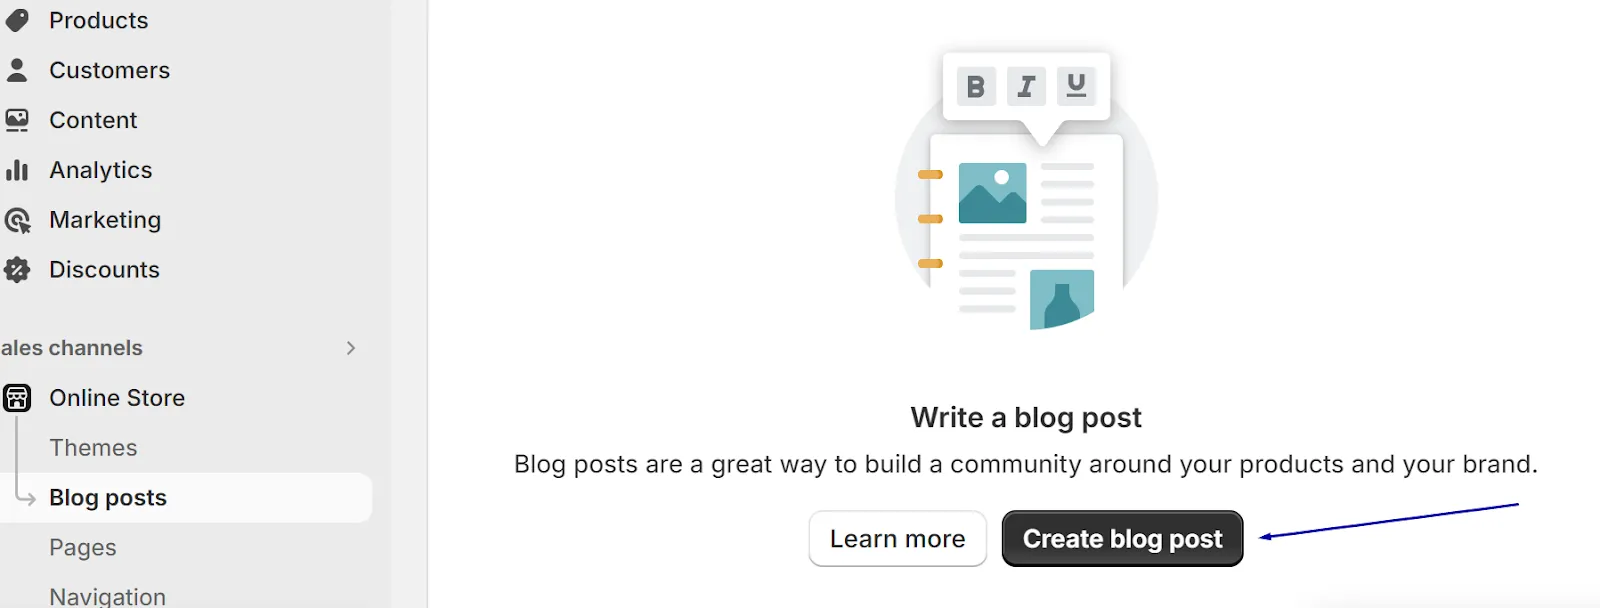 Access the Blog Creation Tool 2